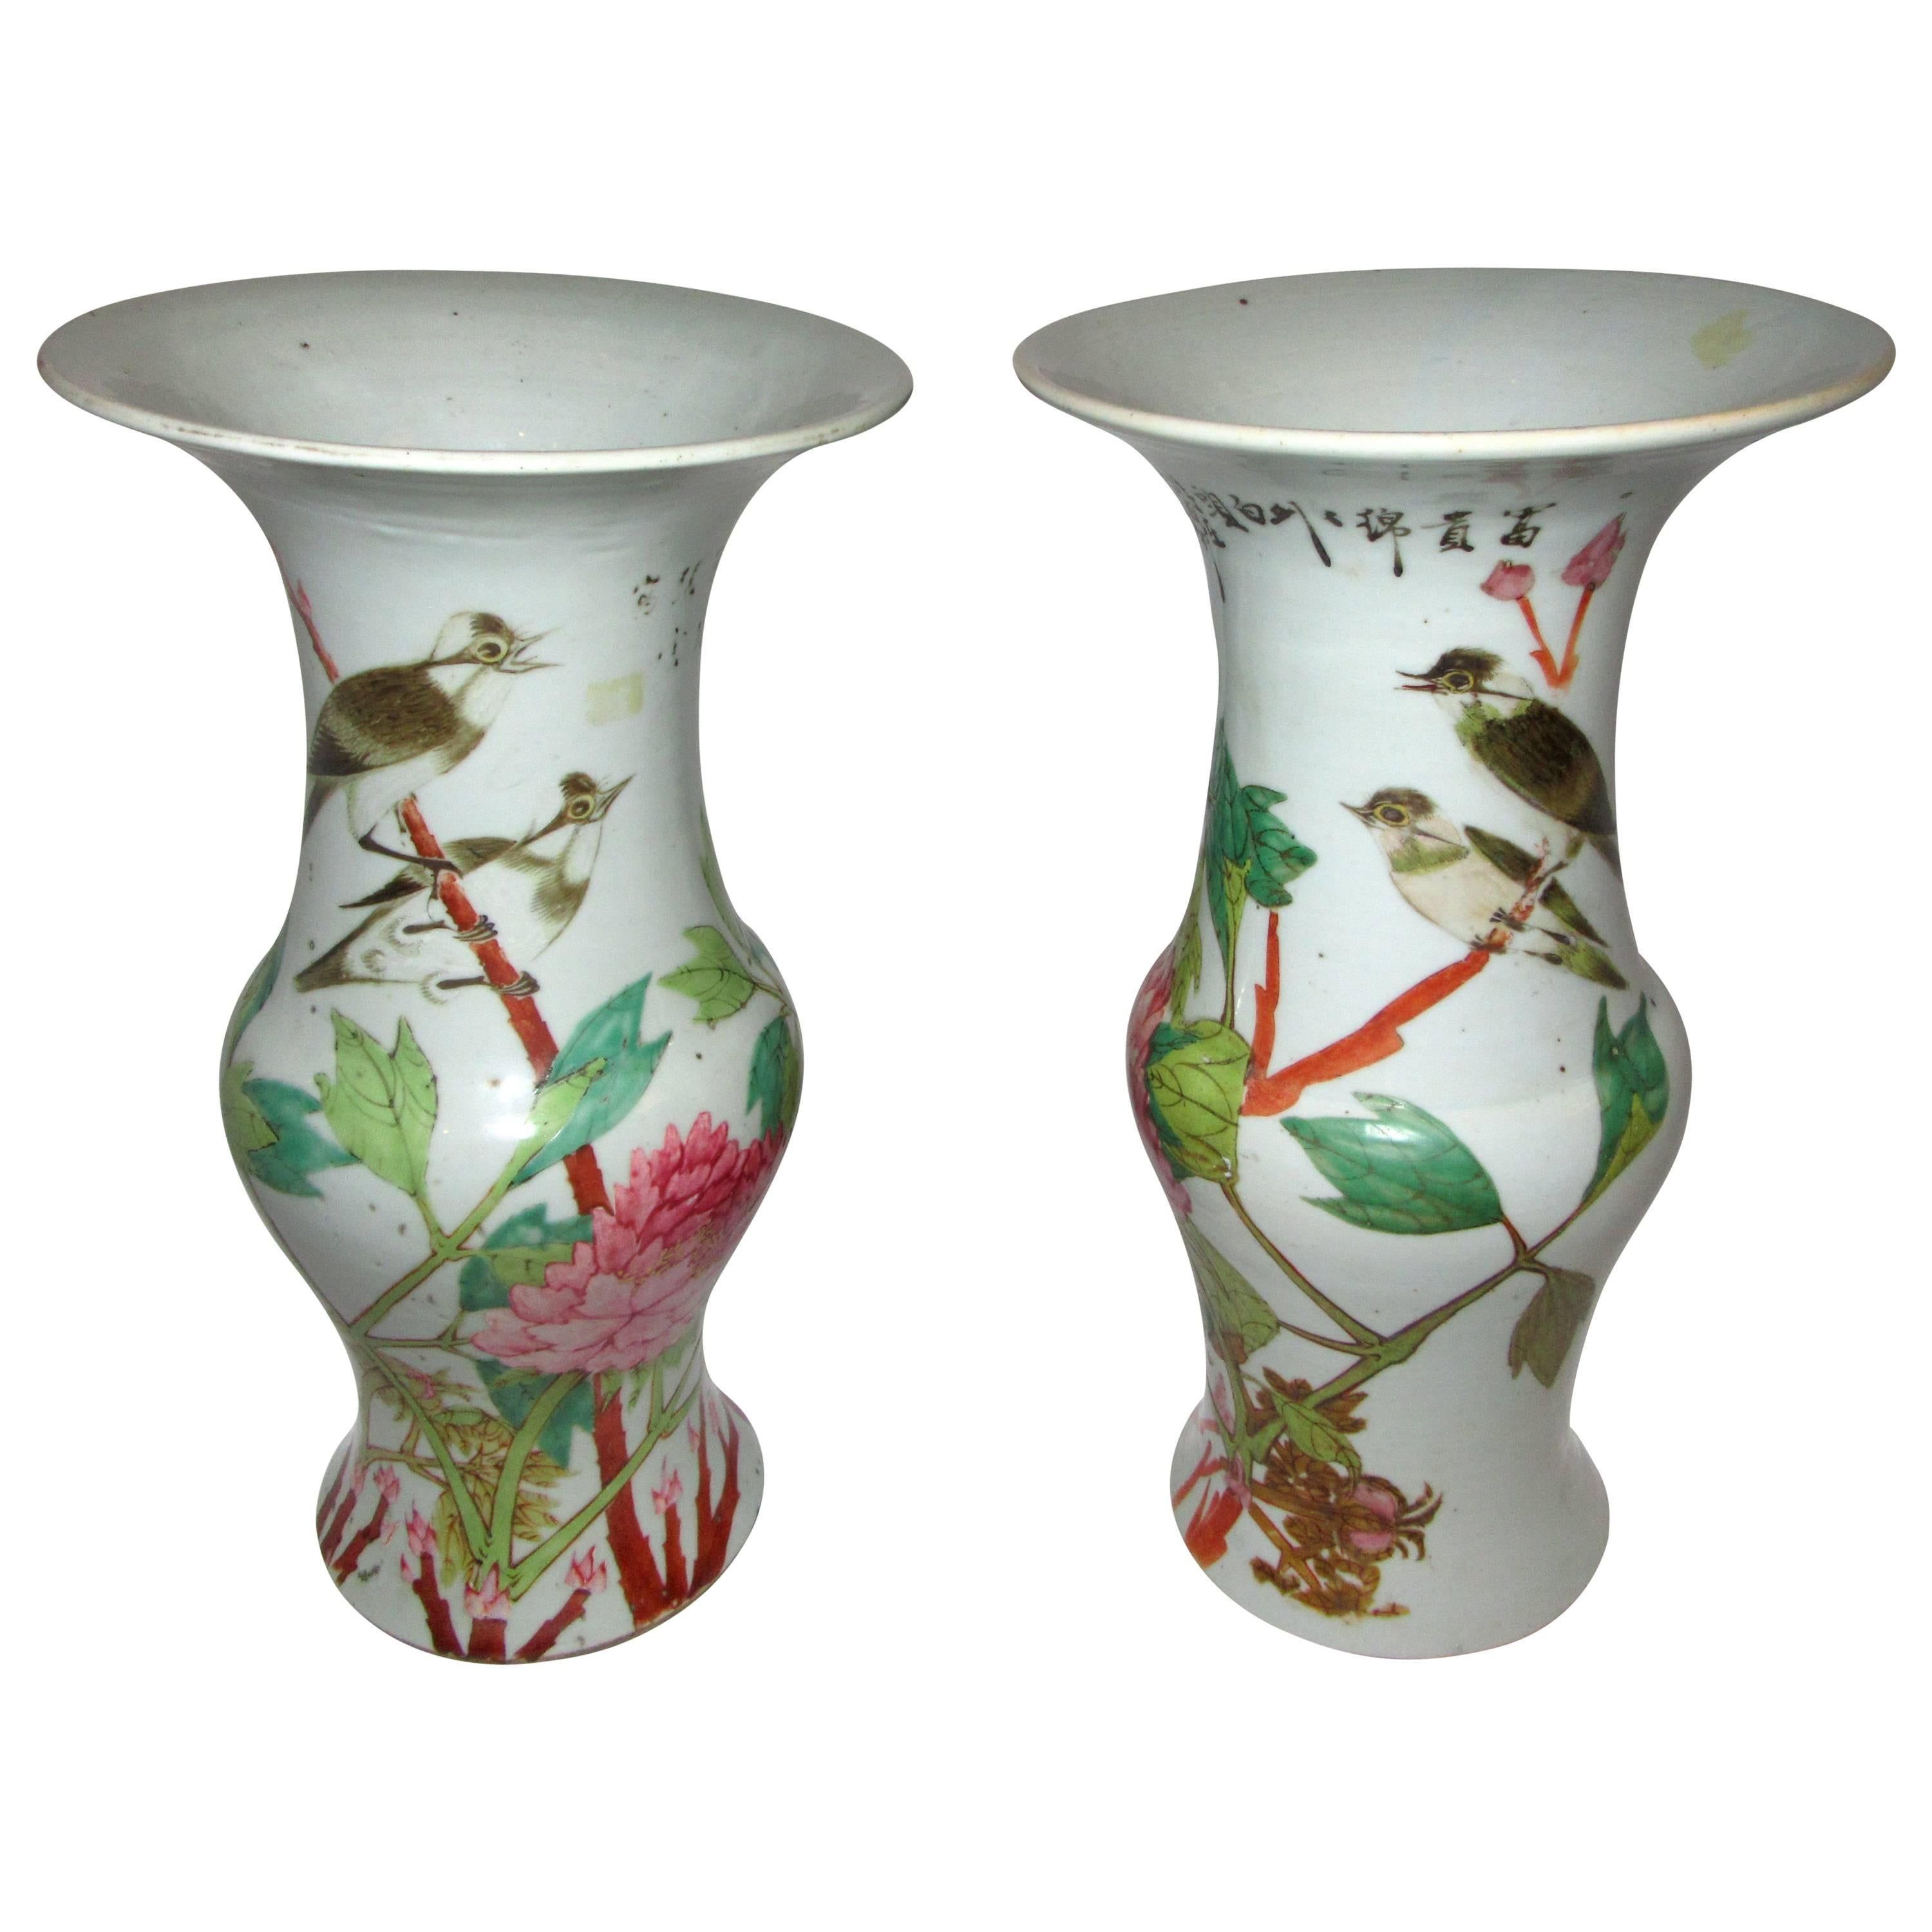 Pair of Chinese Qing Dynasty Porcelain Temple Vases